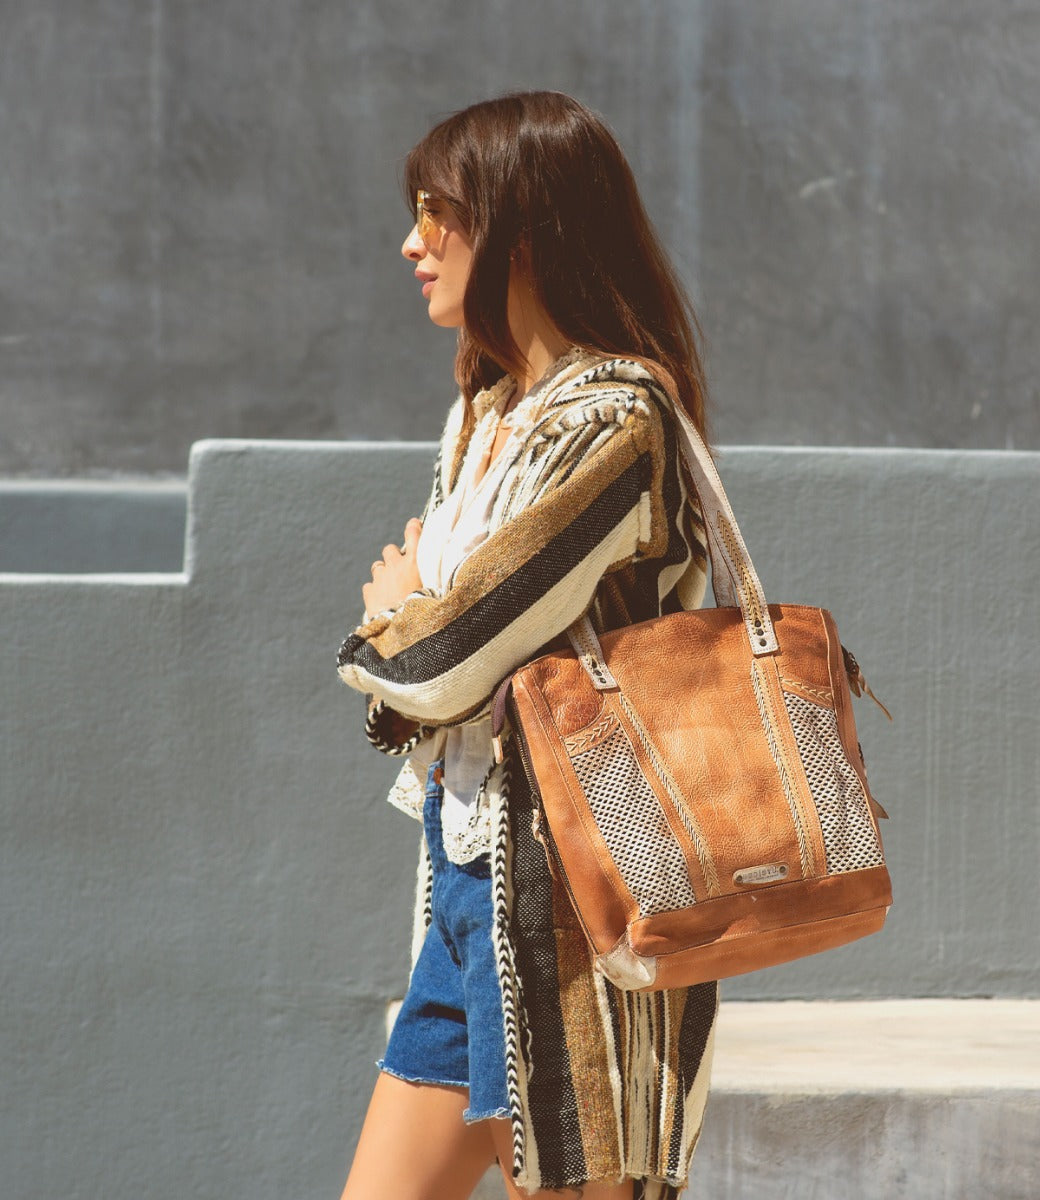 A woman wearing shorts and a striped blazer carrying a Bed Stu Amelie tote bag.